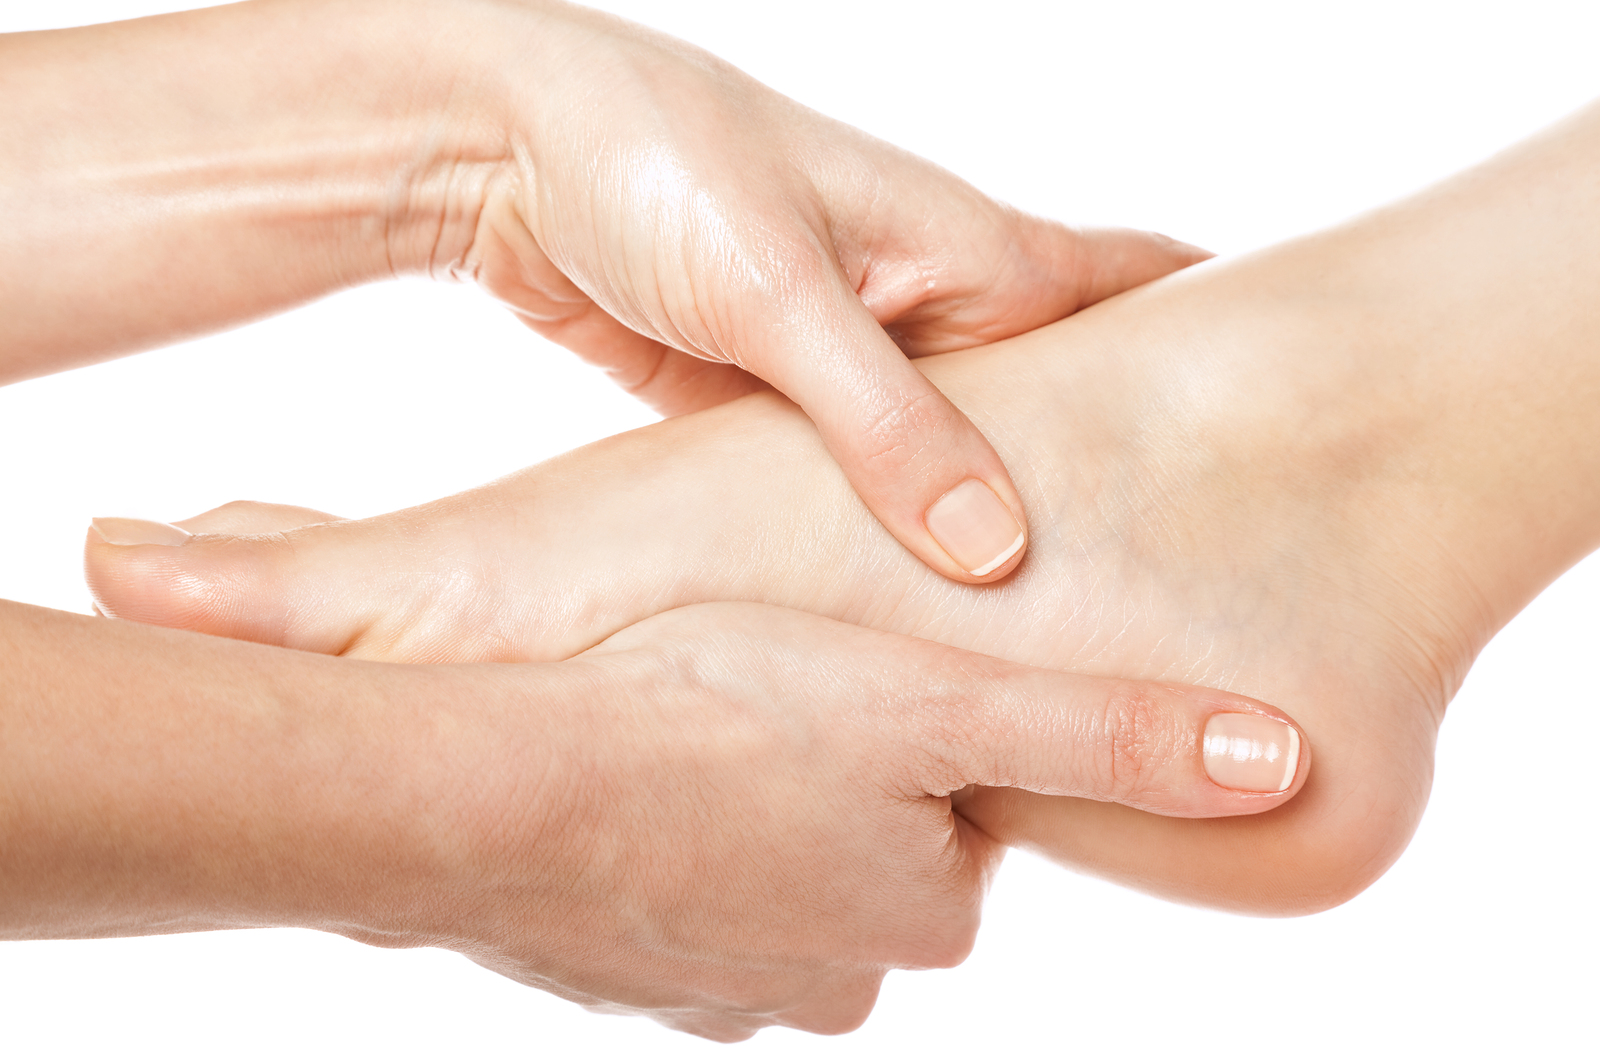 Peripheral Neuropathy: Causes, Symptoms and Treatments